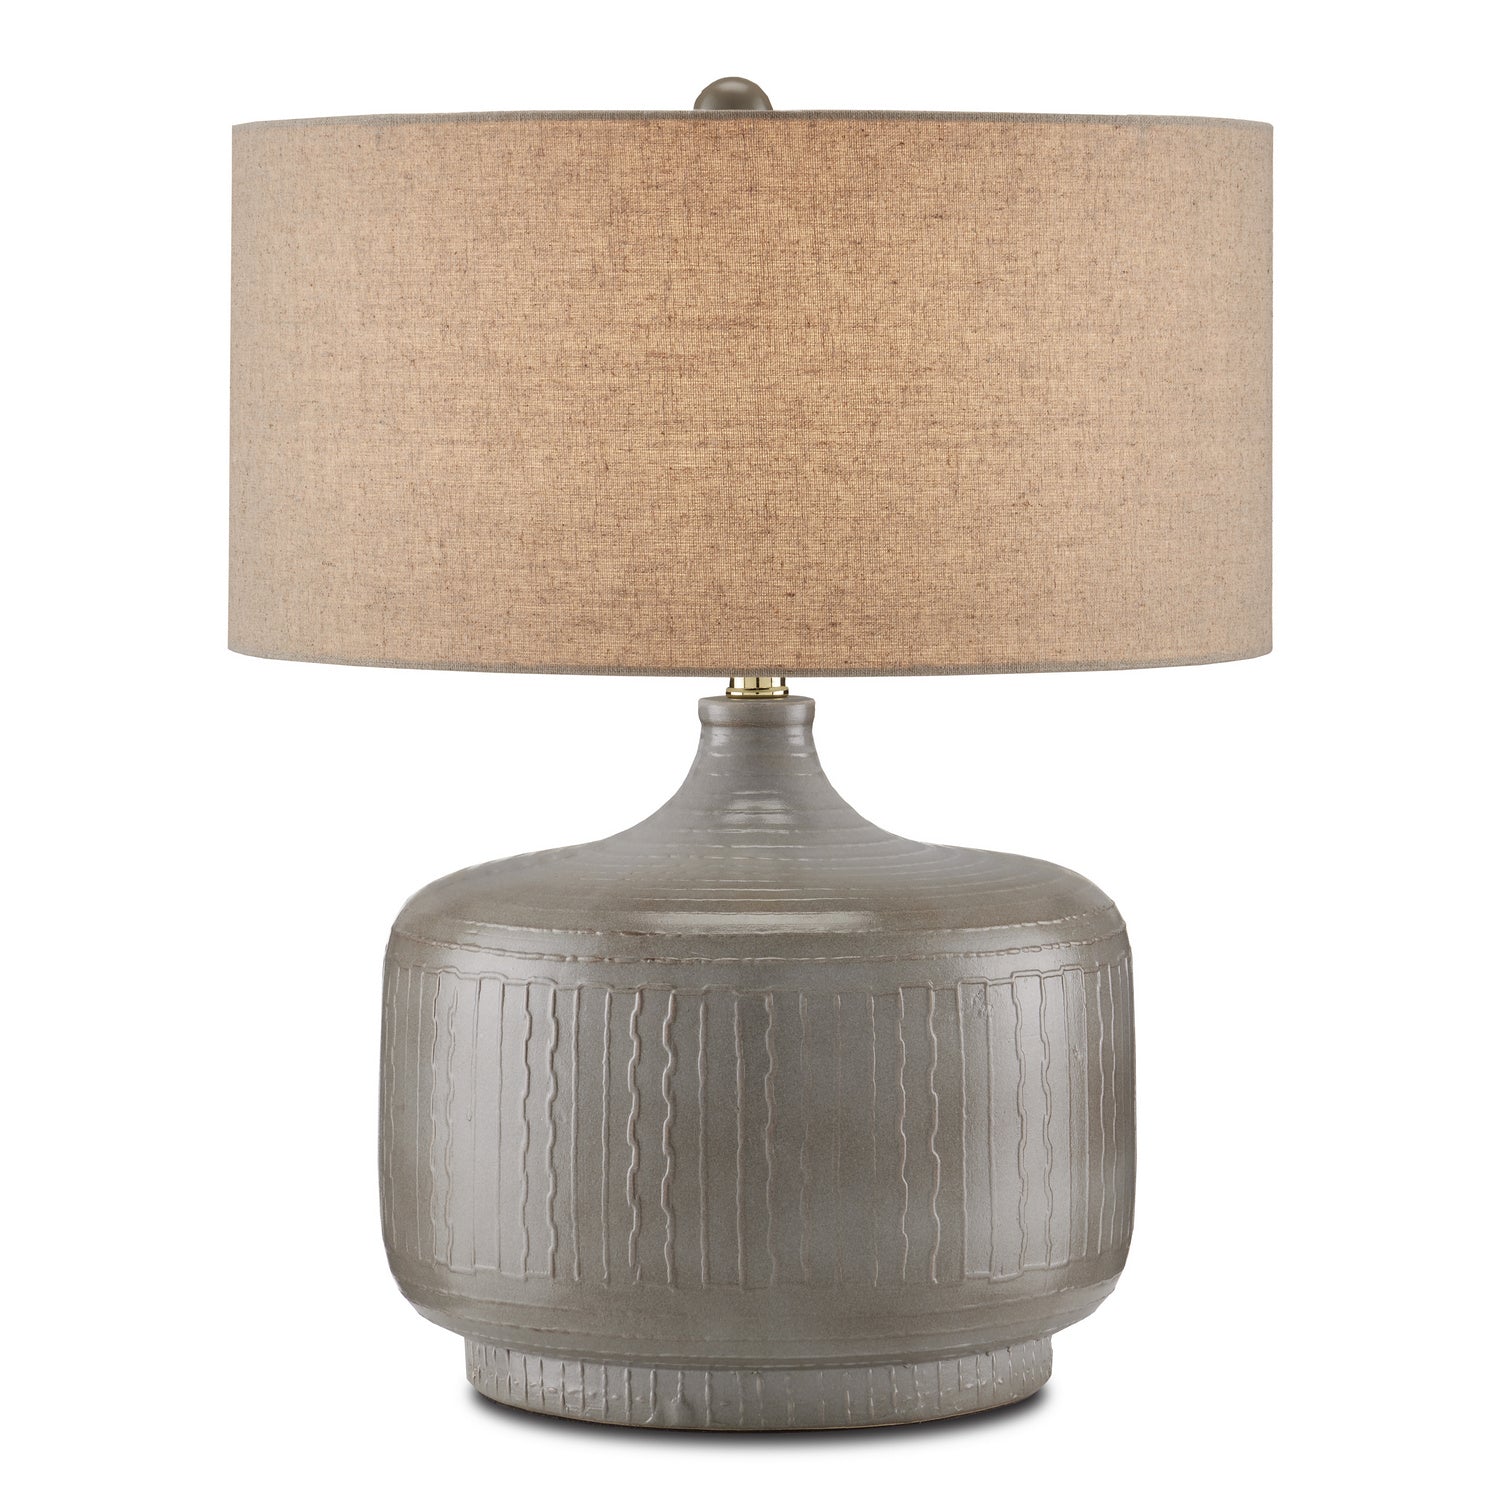 Currey and Company - 6000-0818 - One Light Table Lamp - Alameda - Gray/Polished Brass